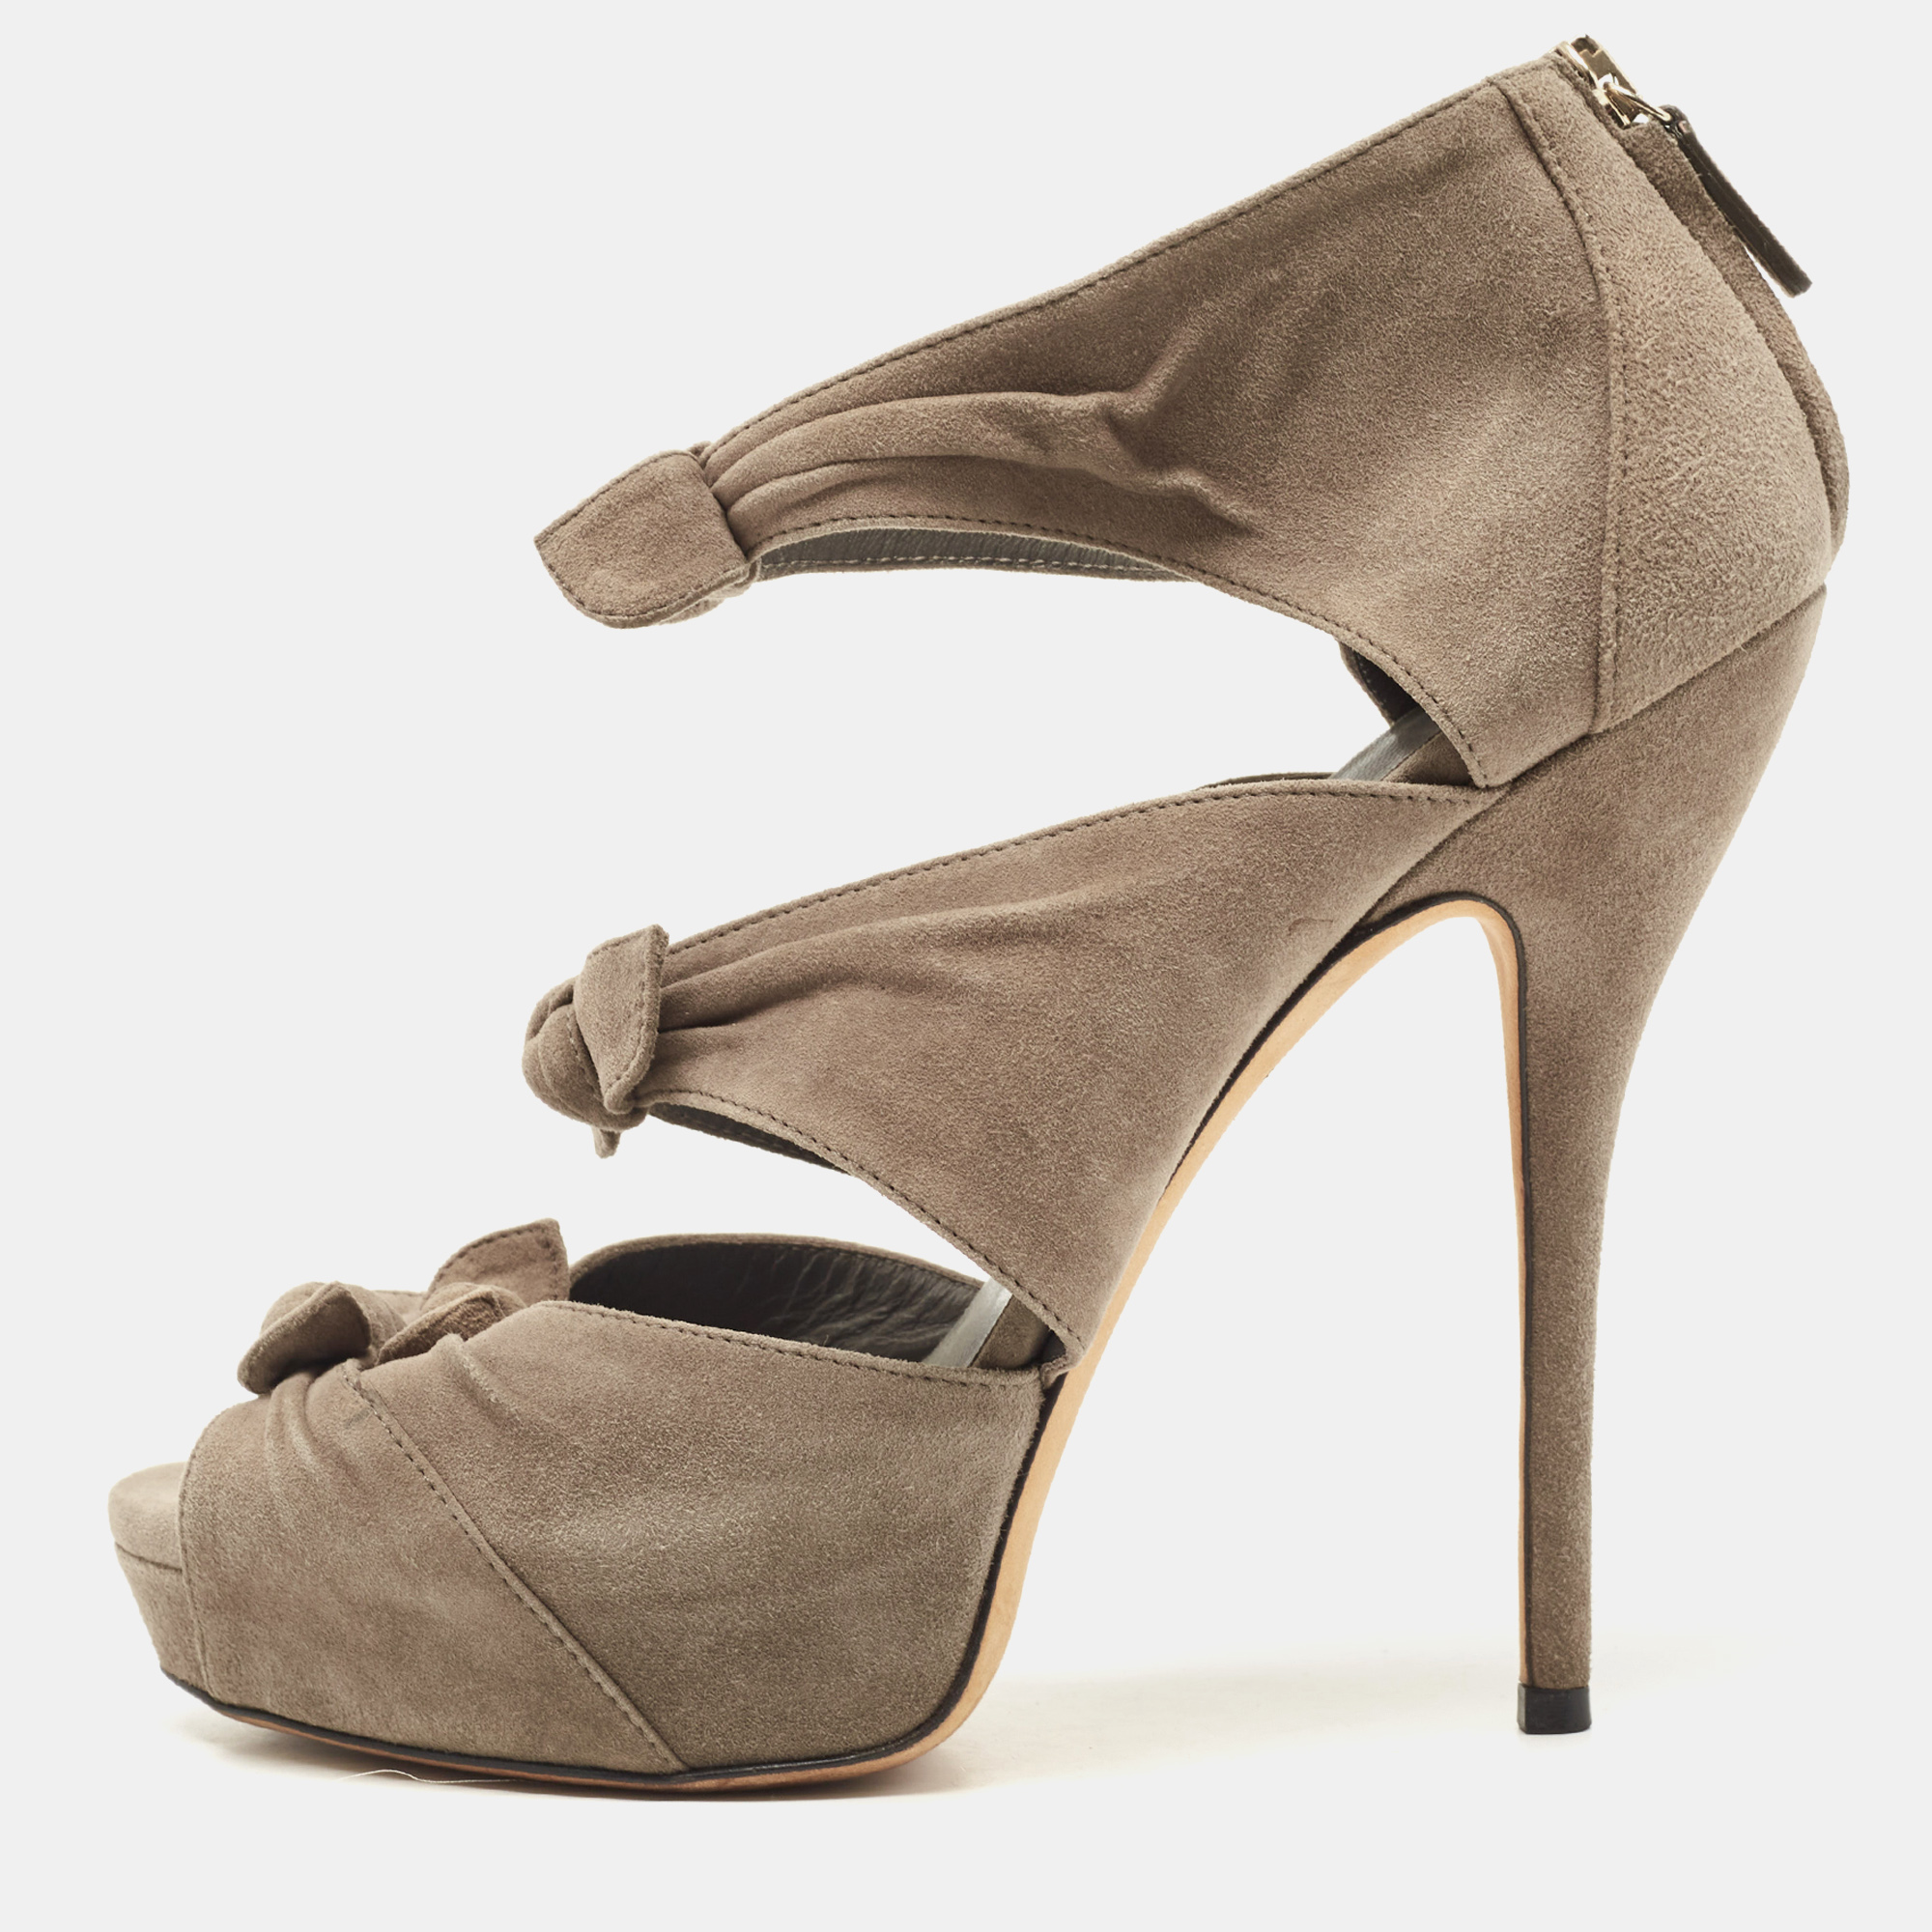 Gucci grey suede bow ankle strap sandals size 38